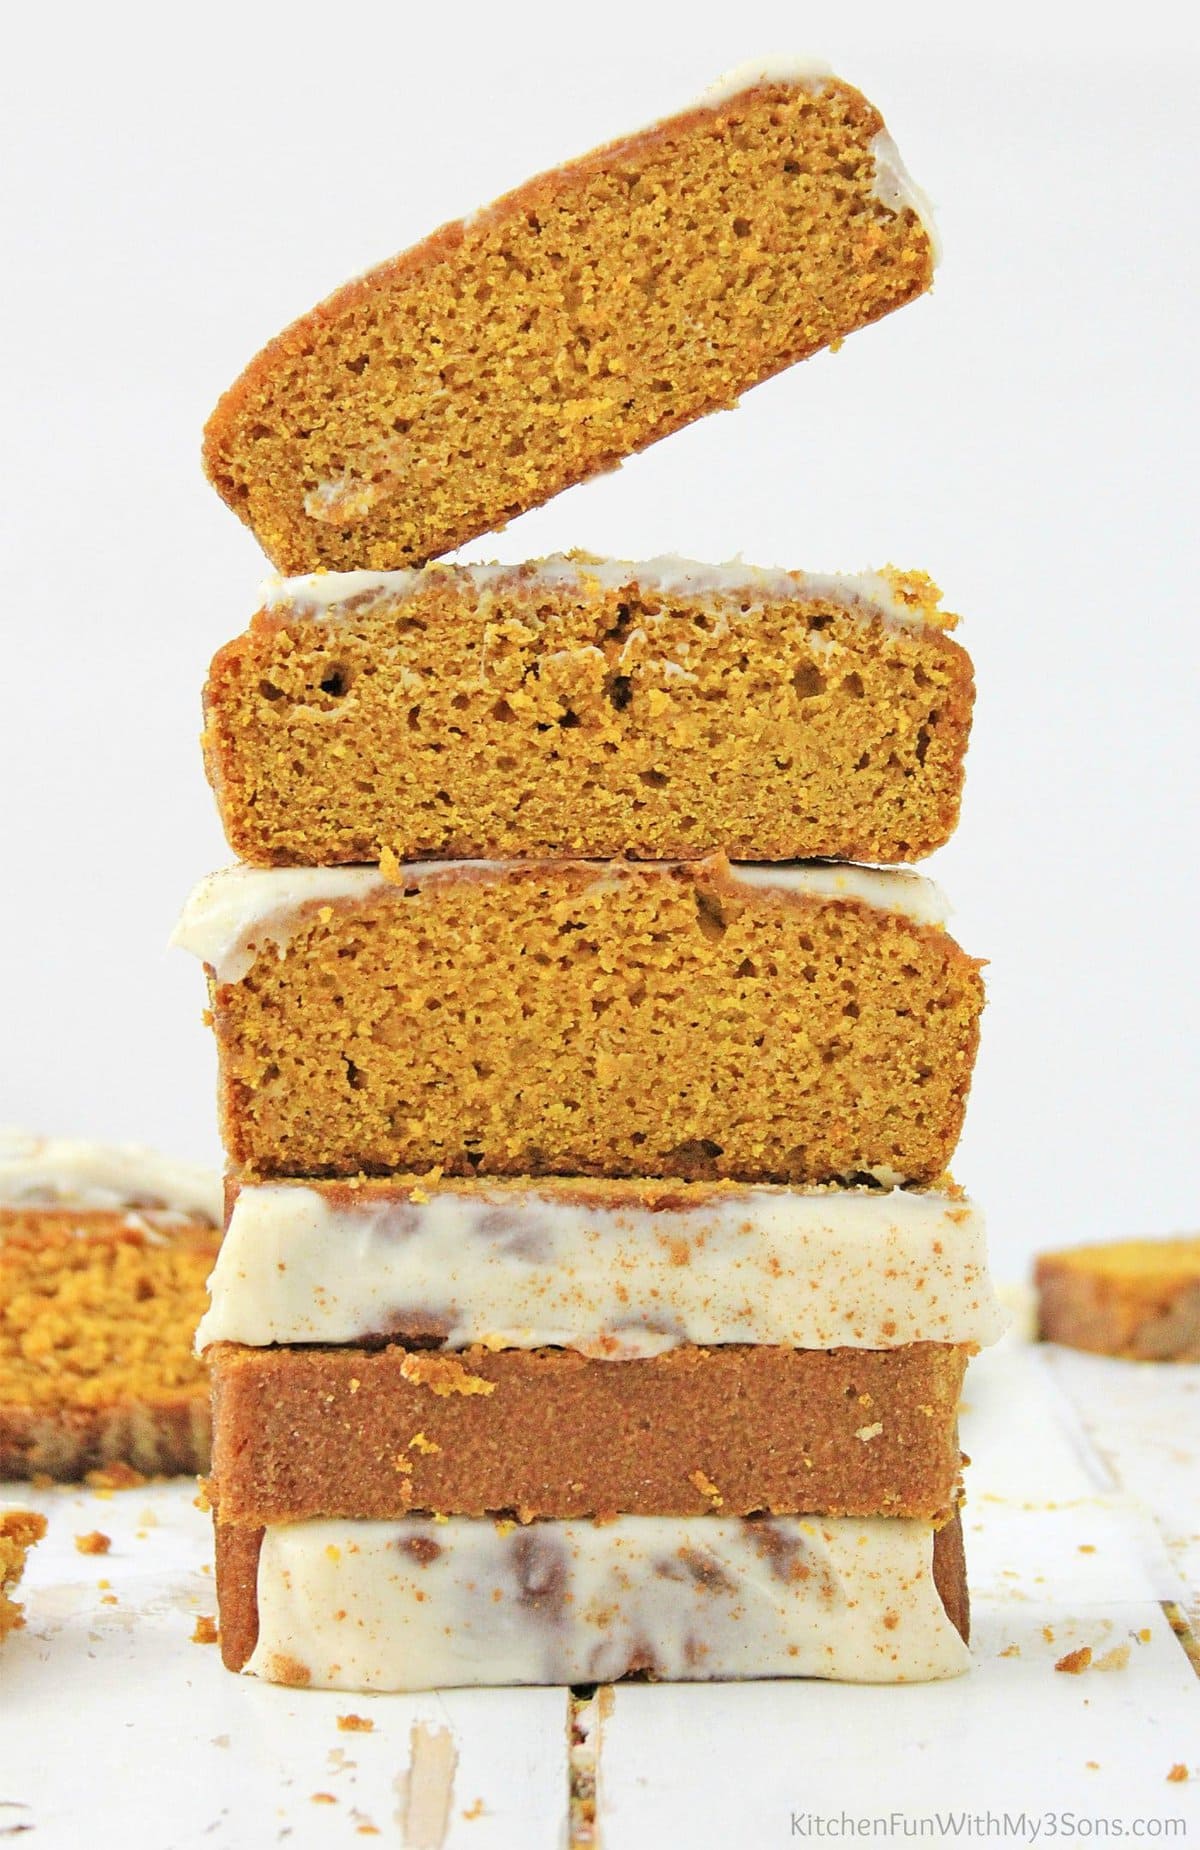 A stack of gluten free pumpkin bread slices sitting on a wood surface